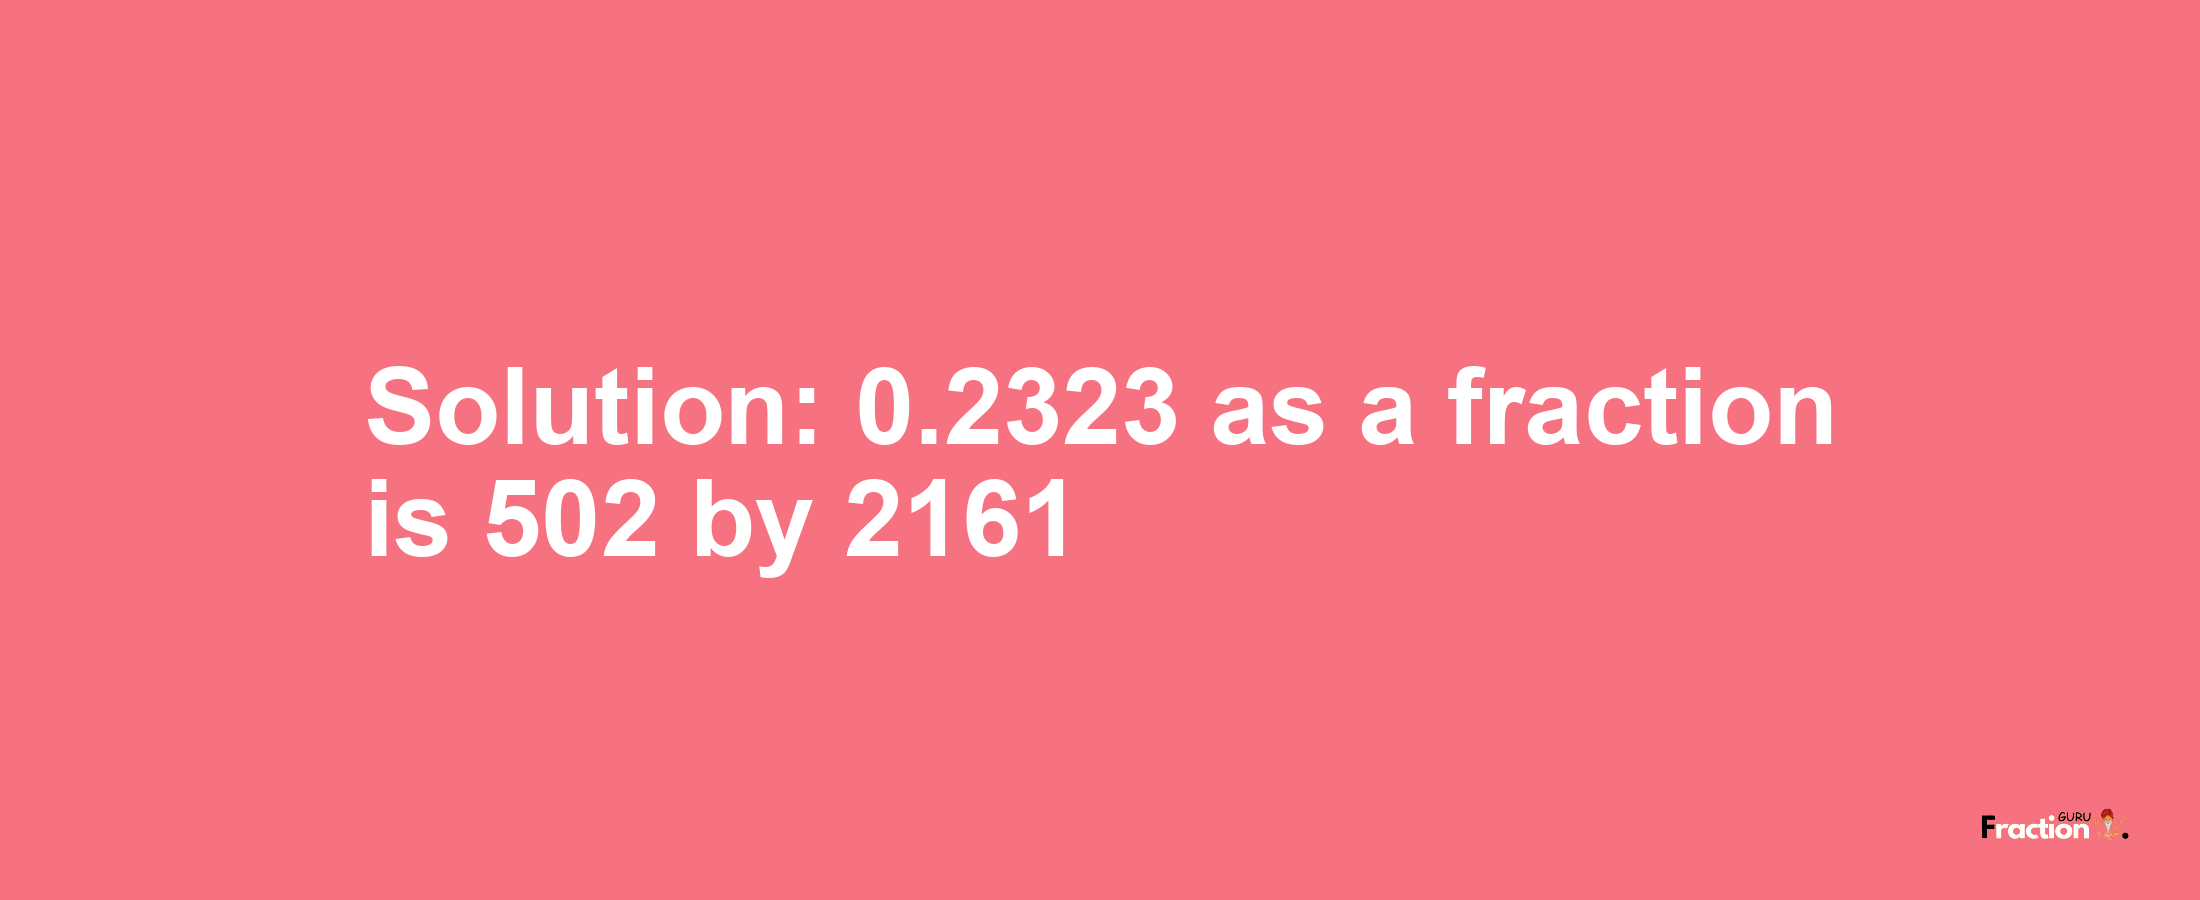 Solution:0.2323 as a fraction is 502/2161